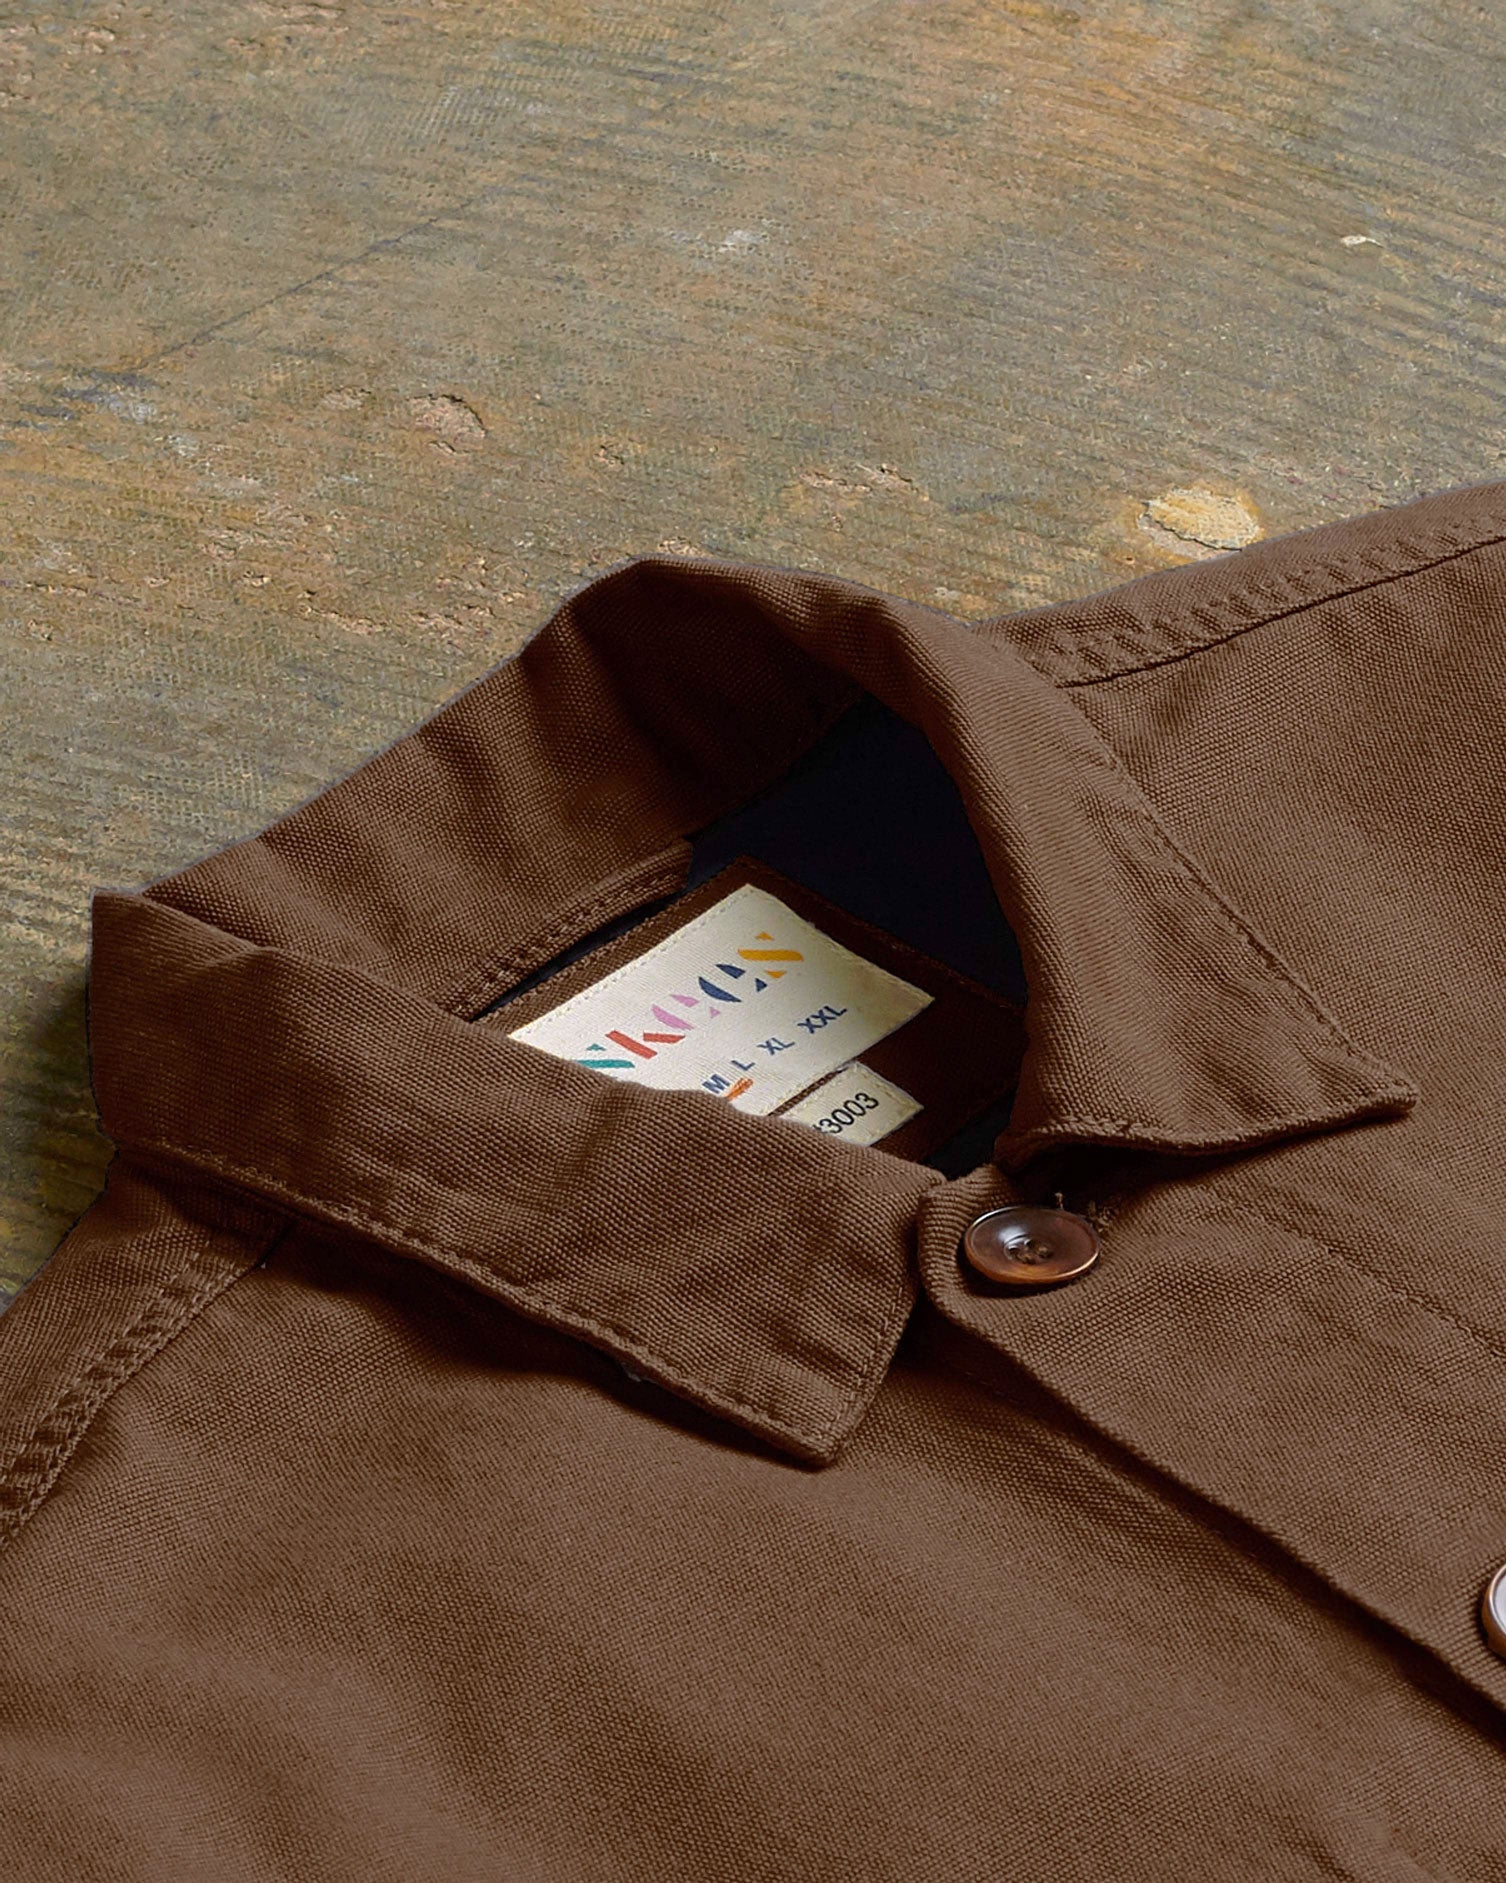 Angled flat view of the collar of the #3003 Uskees button-down work shirt in brown, showing weave of organic cotton and Uskees branding label